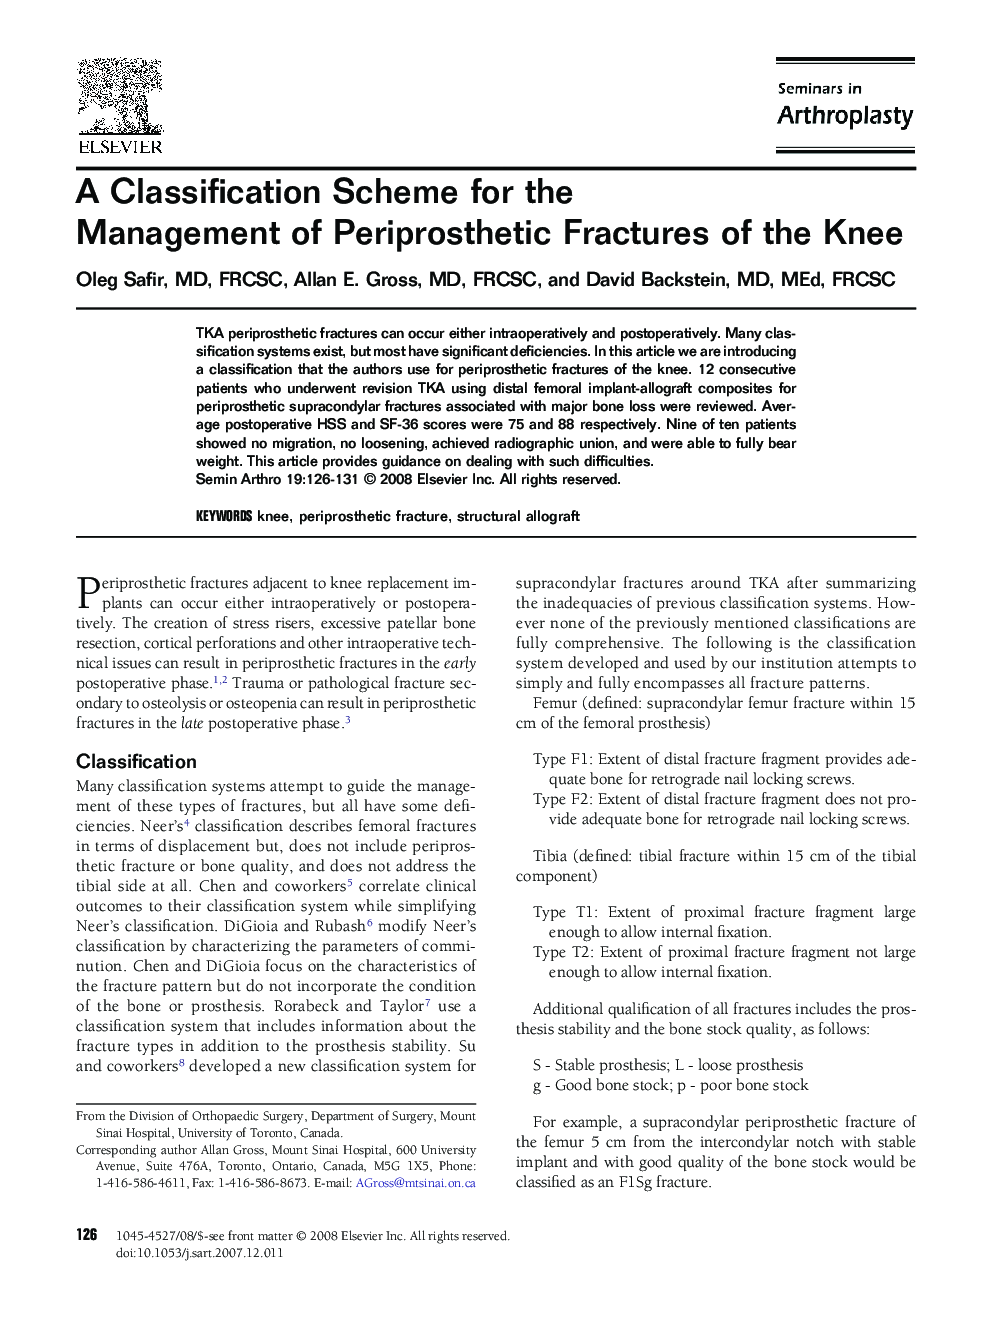 A Classification Scheme for the Management of Periprosthetic Fractures of the Knee